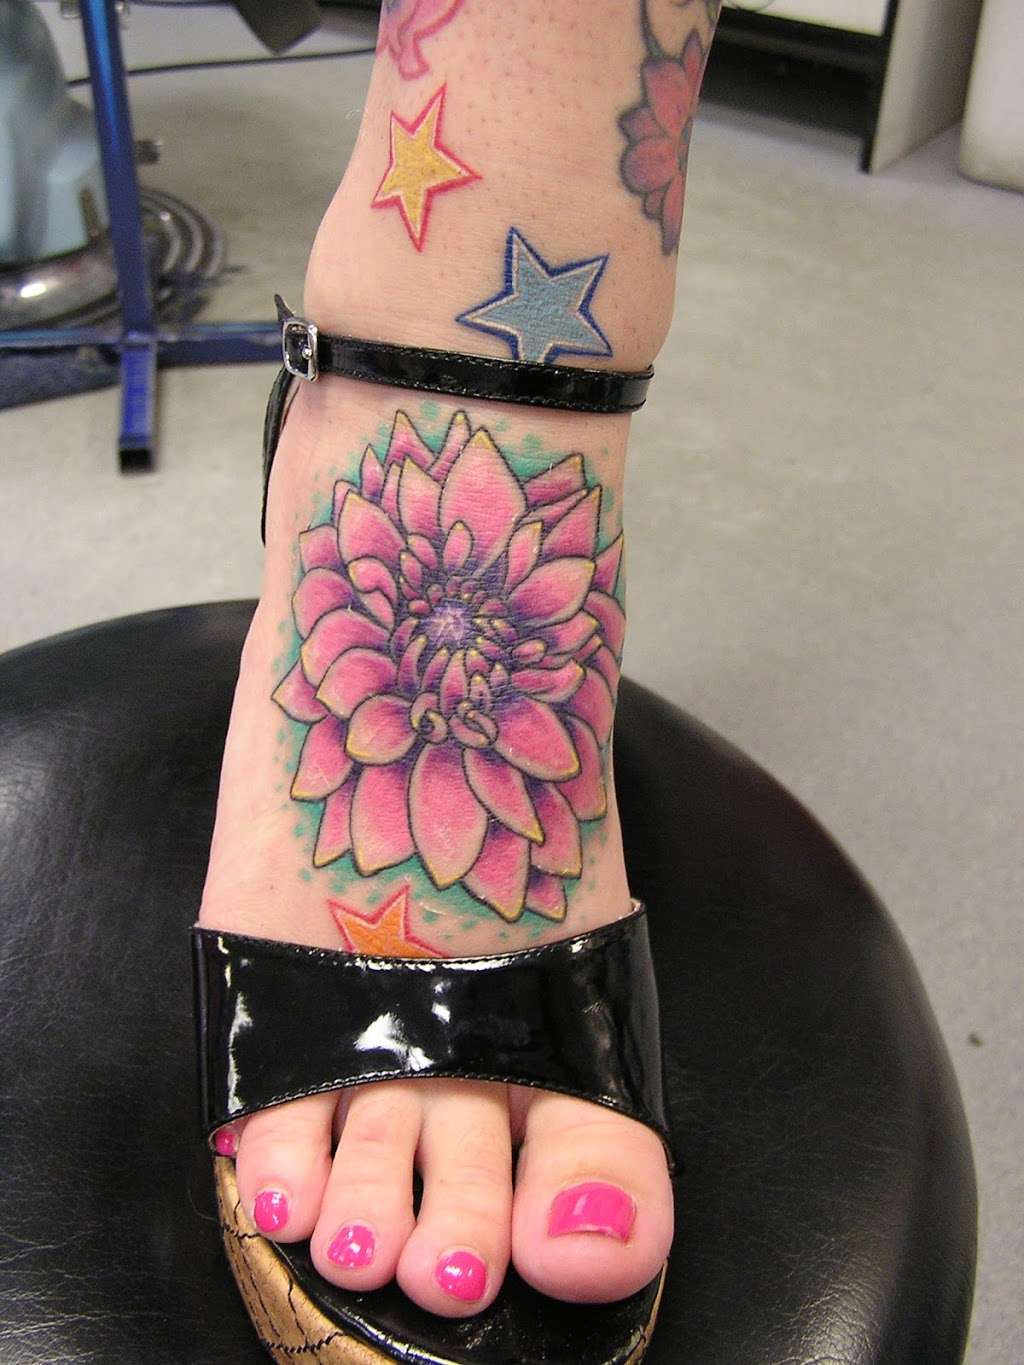 Empire Tattoo | 2176 W Foothill Blvd #A, Upland, CA 91786, USA | Phone: (909) 985-8889